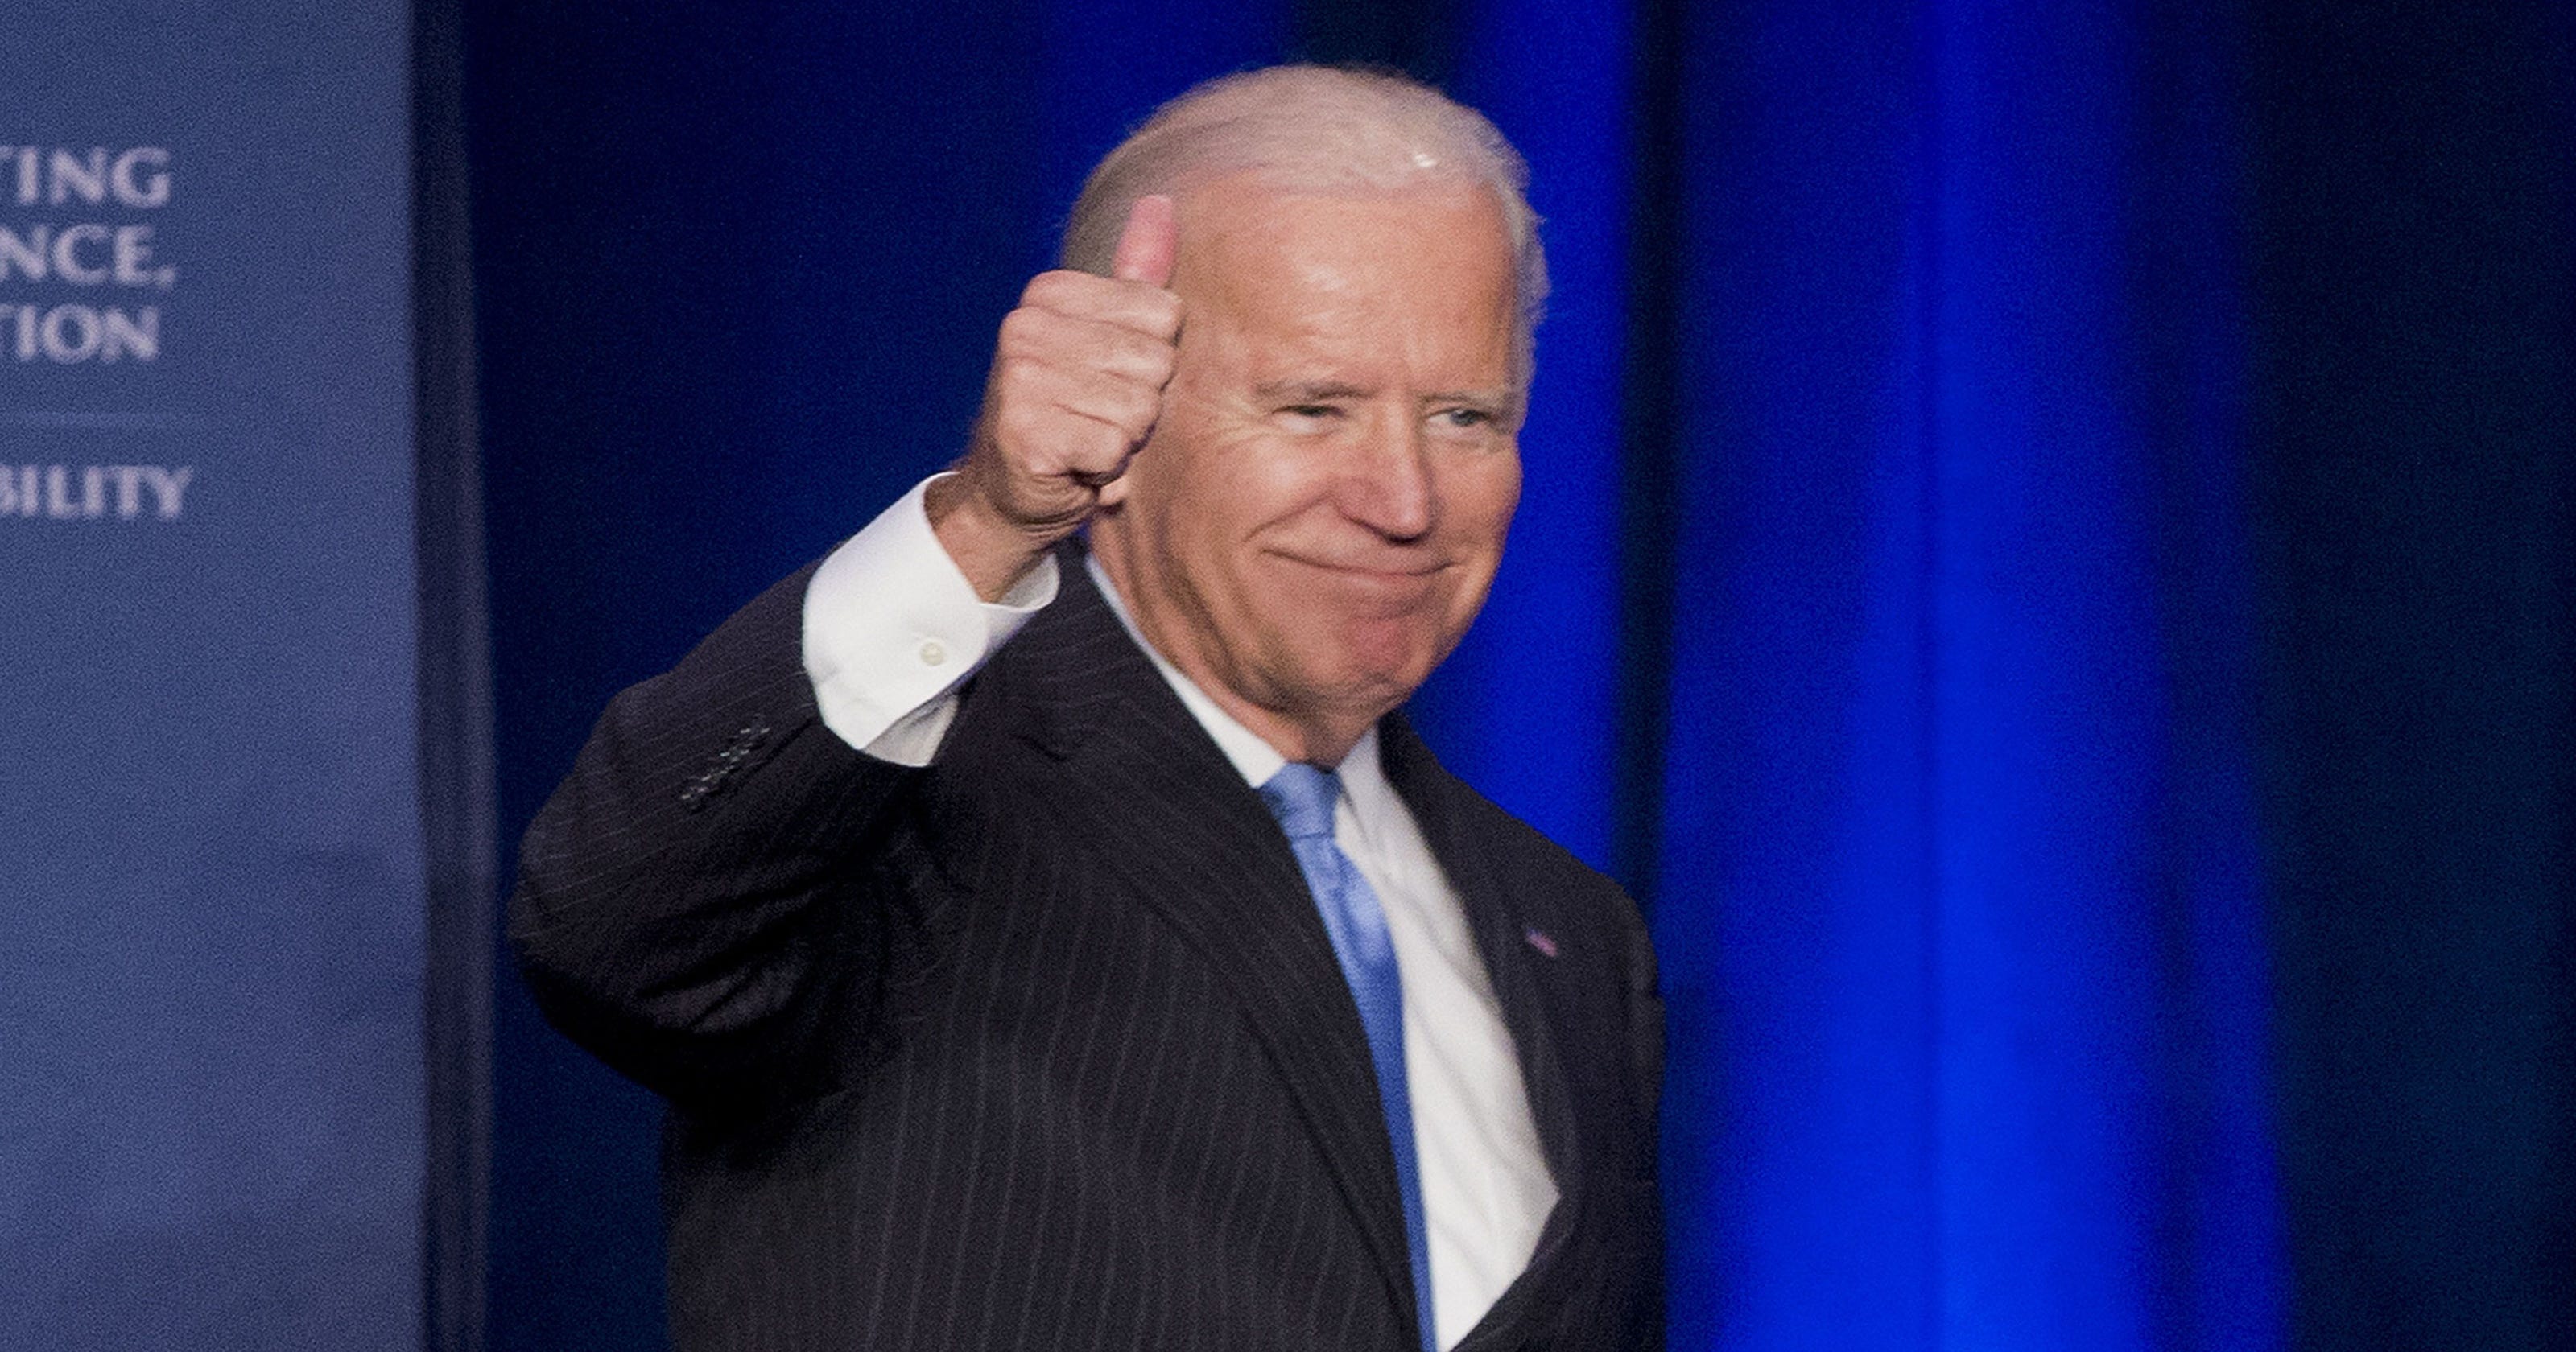 Joe Biden on racism: Whites 'can never fully understand'